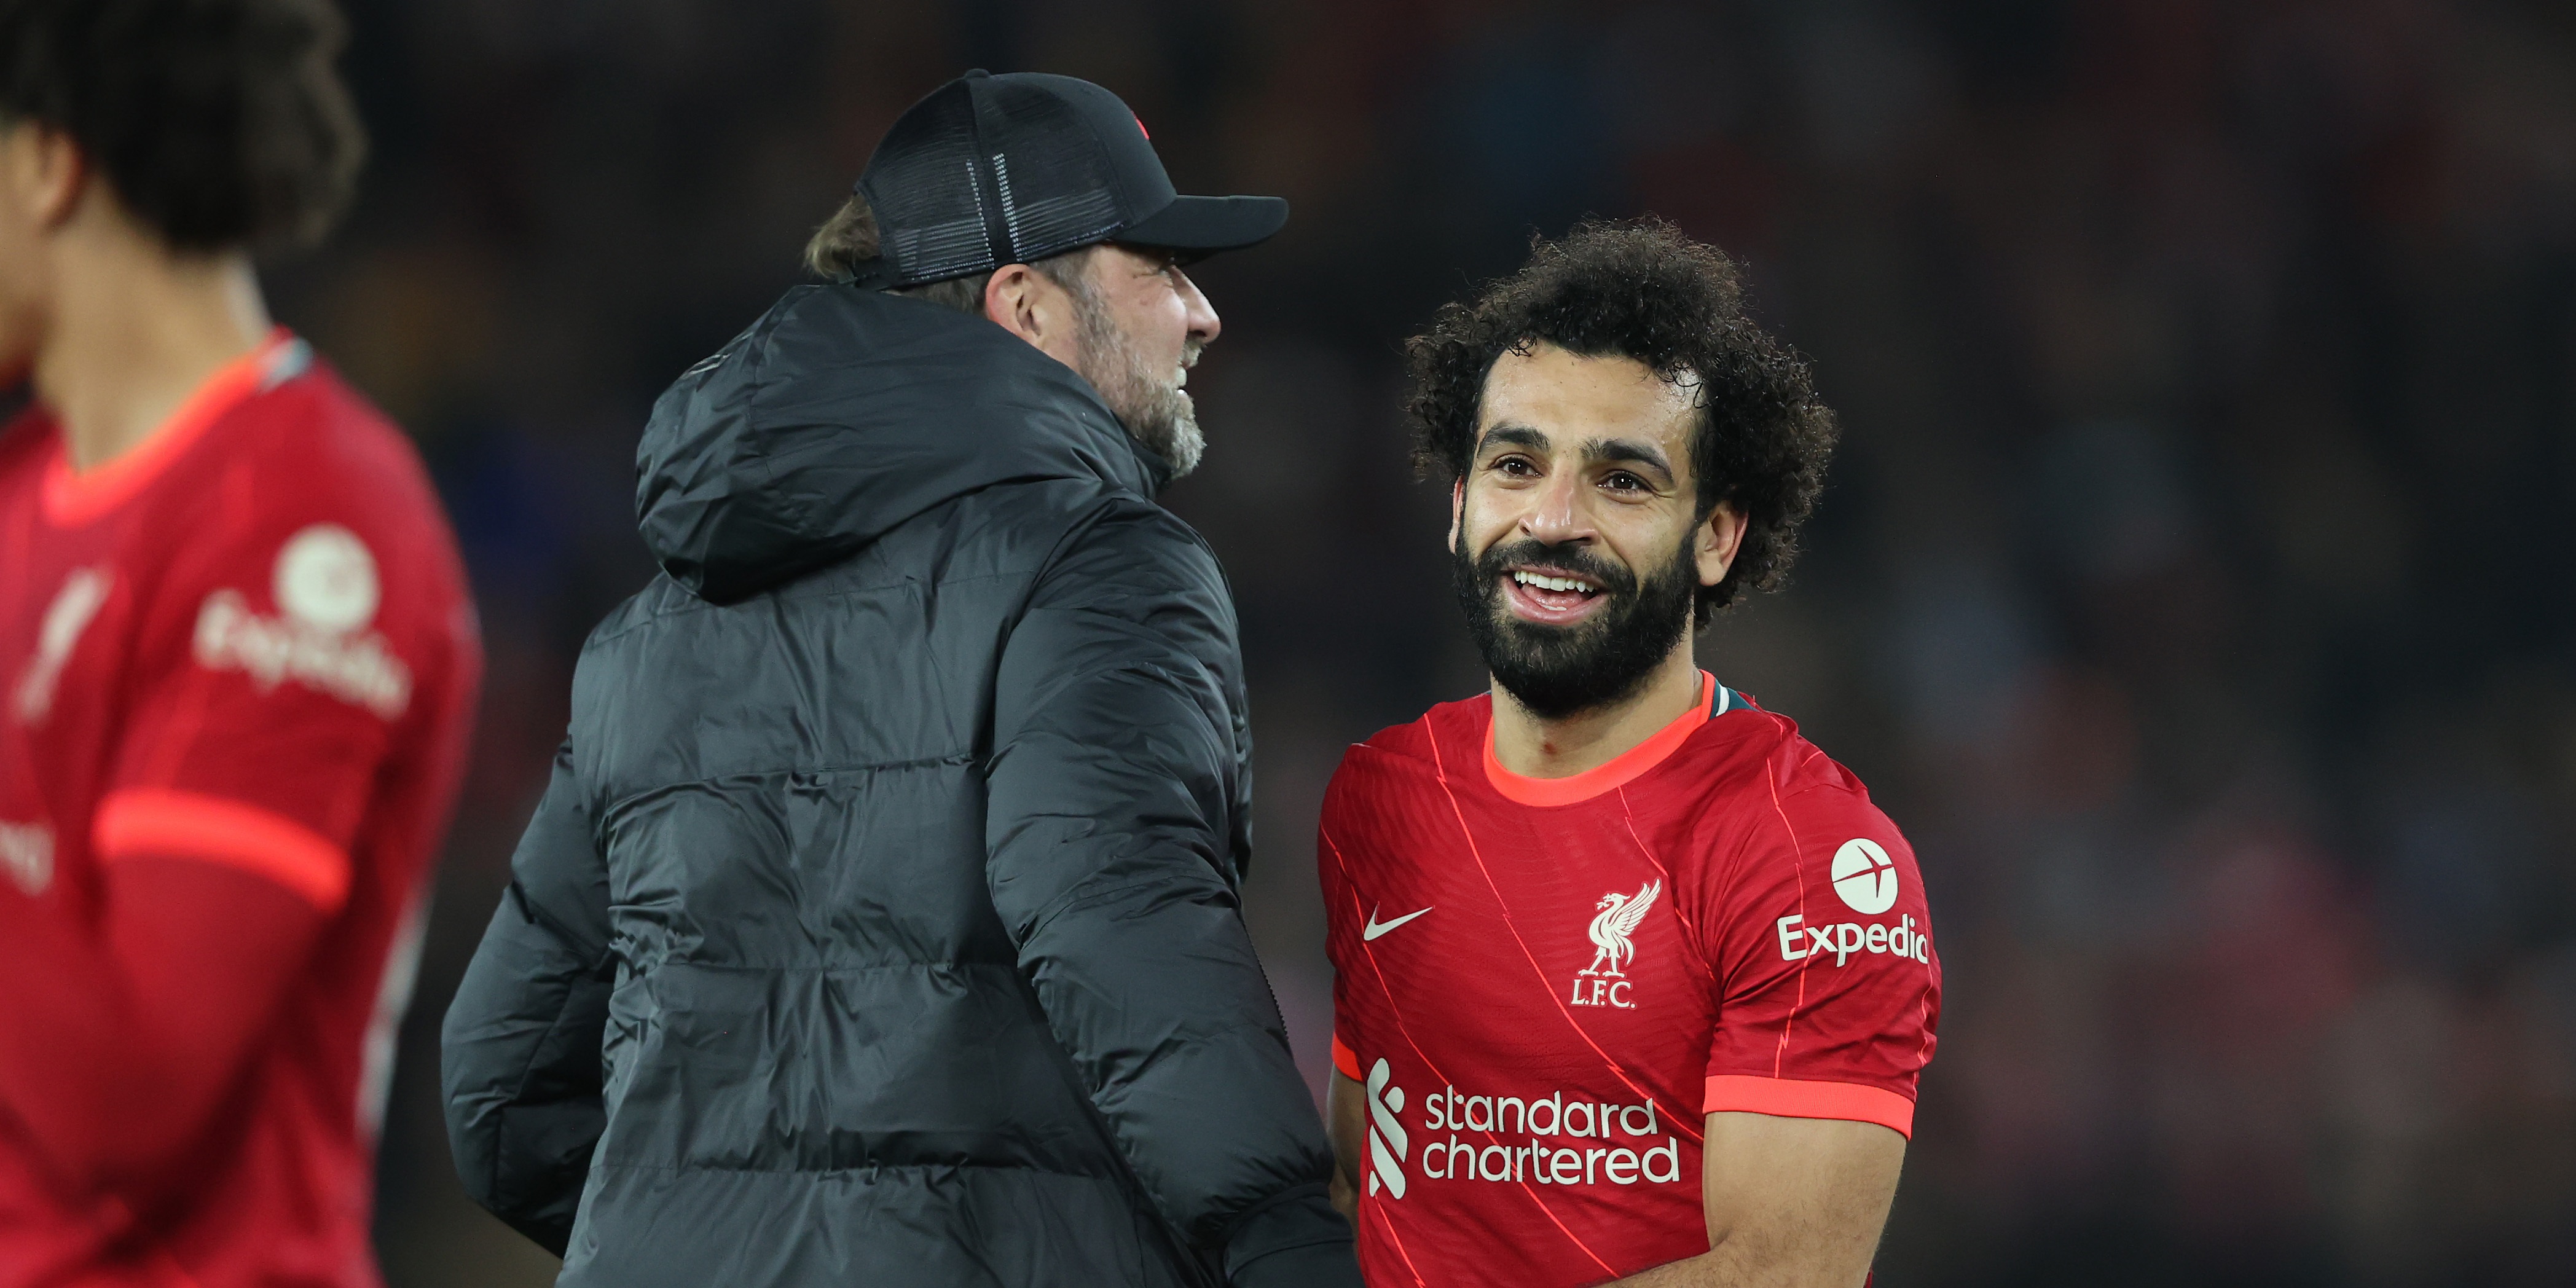 ‘I think Salah will want to stay’ – Former PL striker comments on Mo Salah’s contract situation